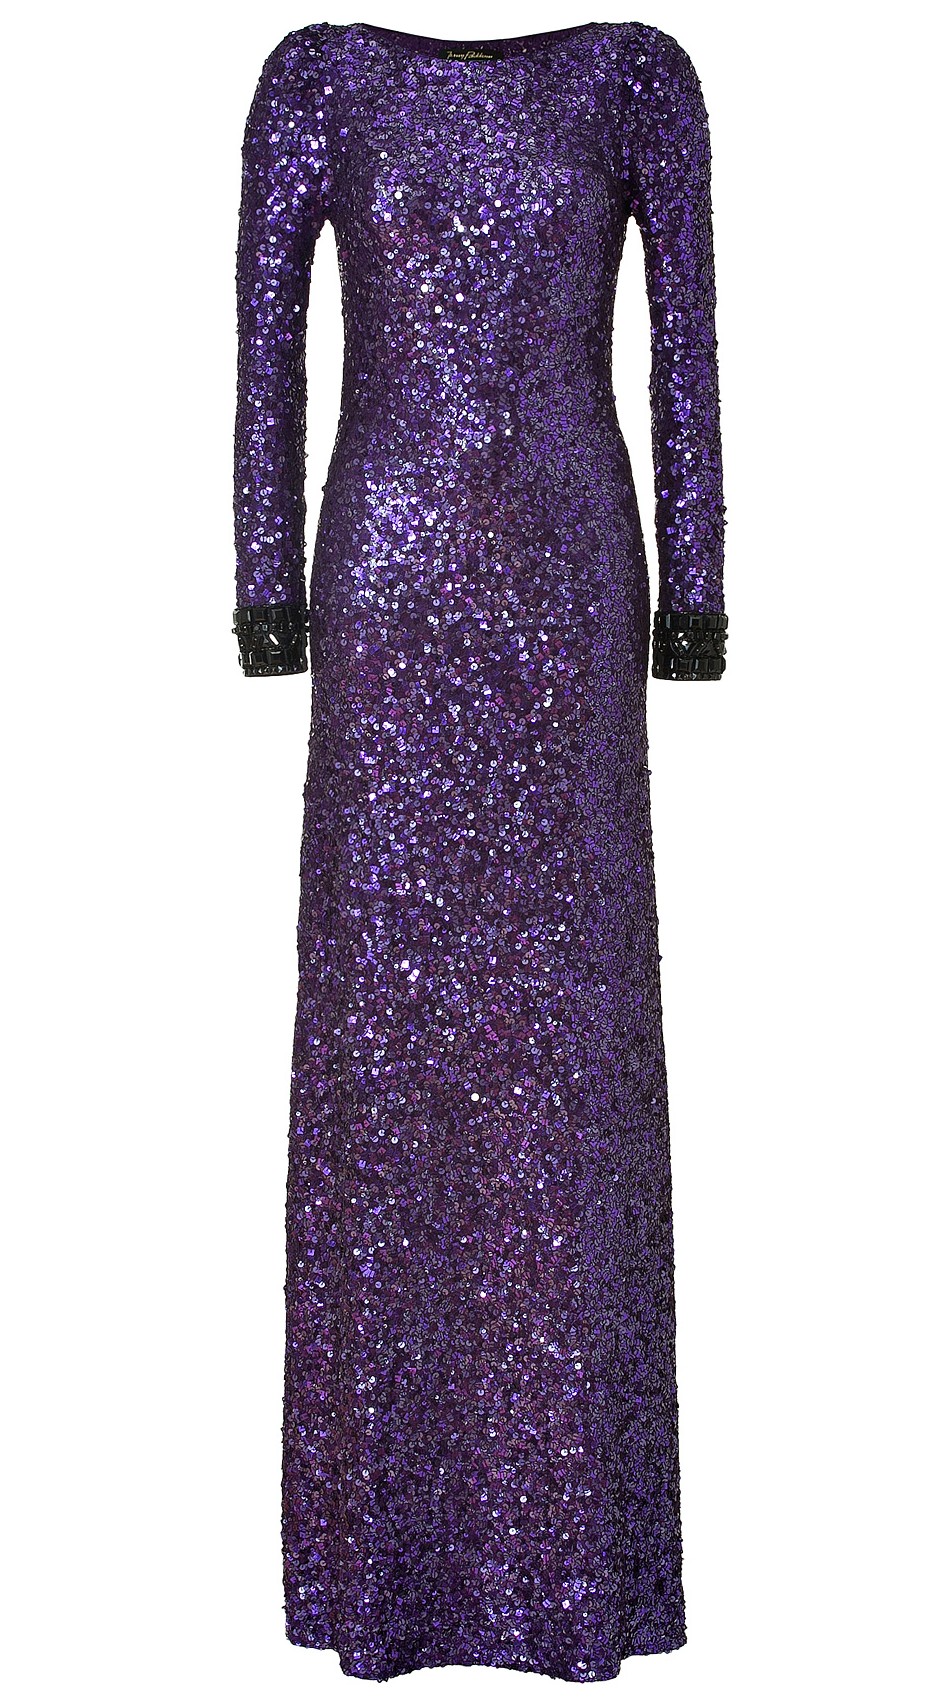 Sparkling Violet All-Over Sequin Dress by JENNY PACKHAM from Stylebop